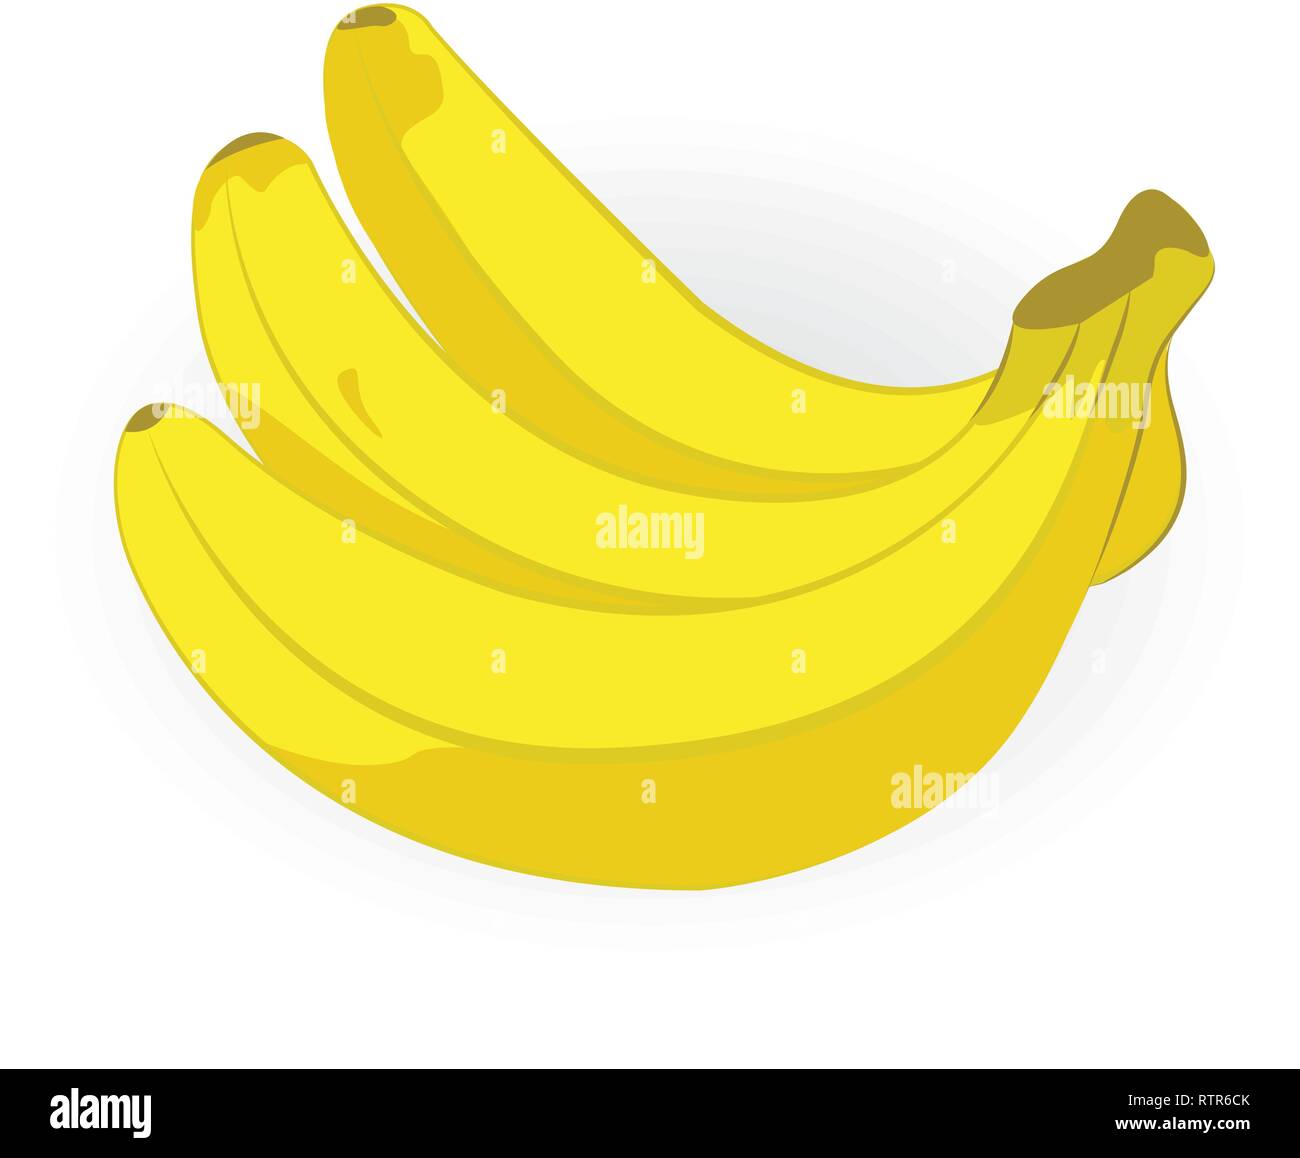 https://c8.alamy.com/comp/RTR6CK/bunch-of-bananas-vector-illustration-on-a-white-background-RTR6CK.jpg